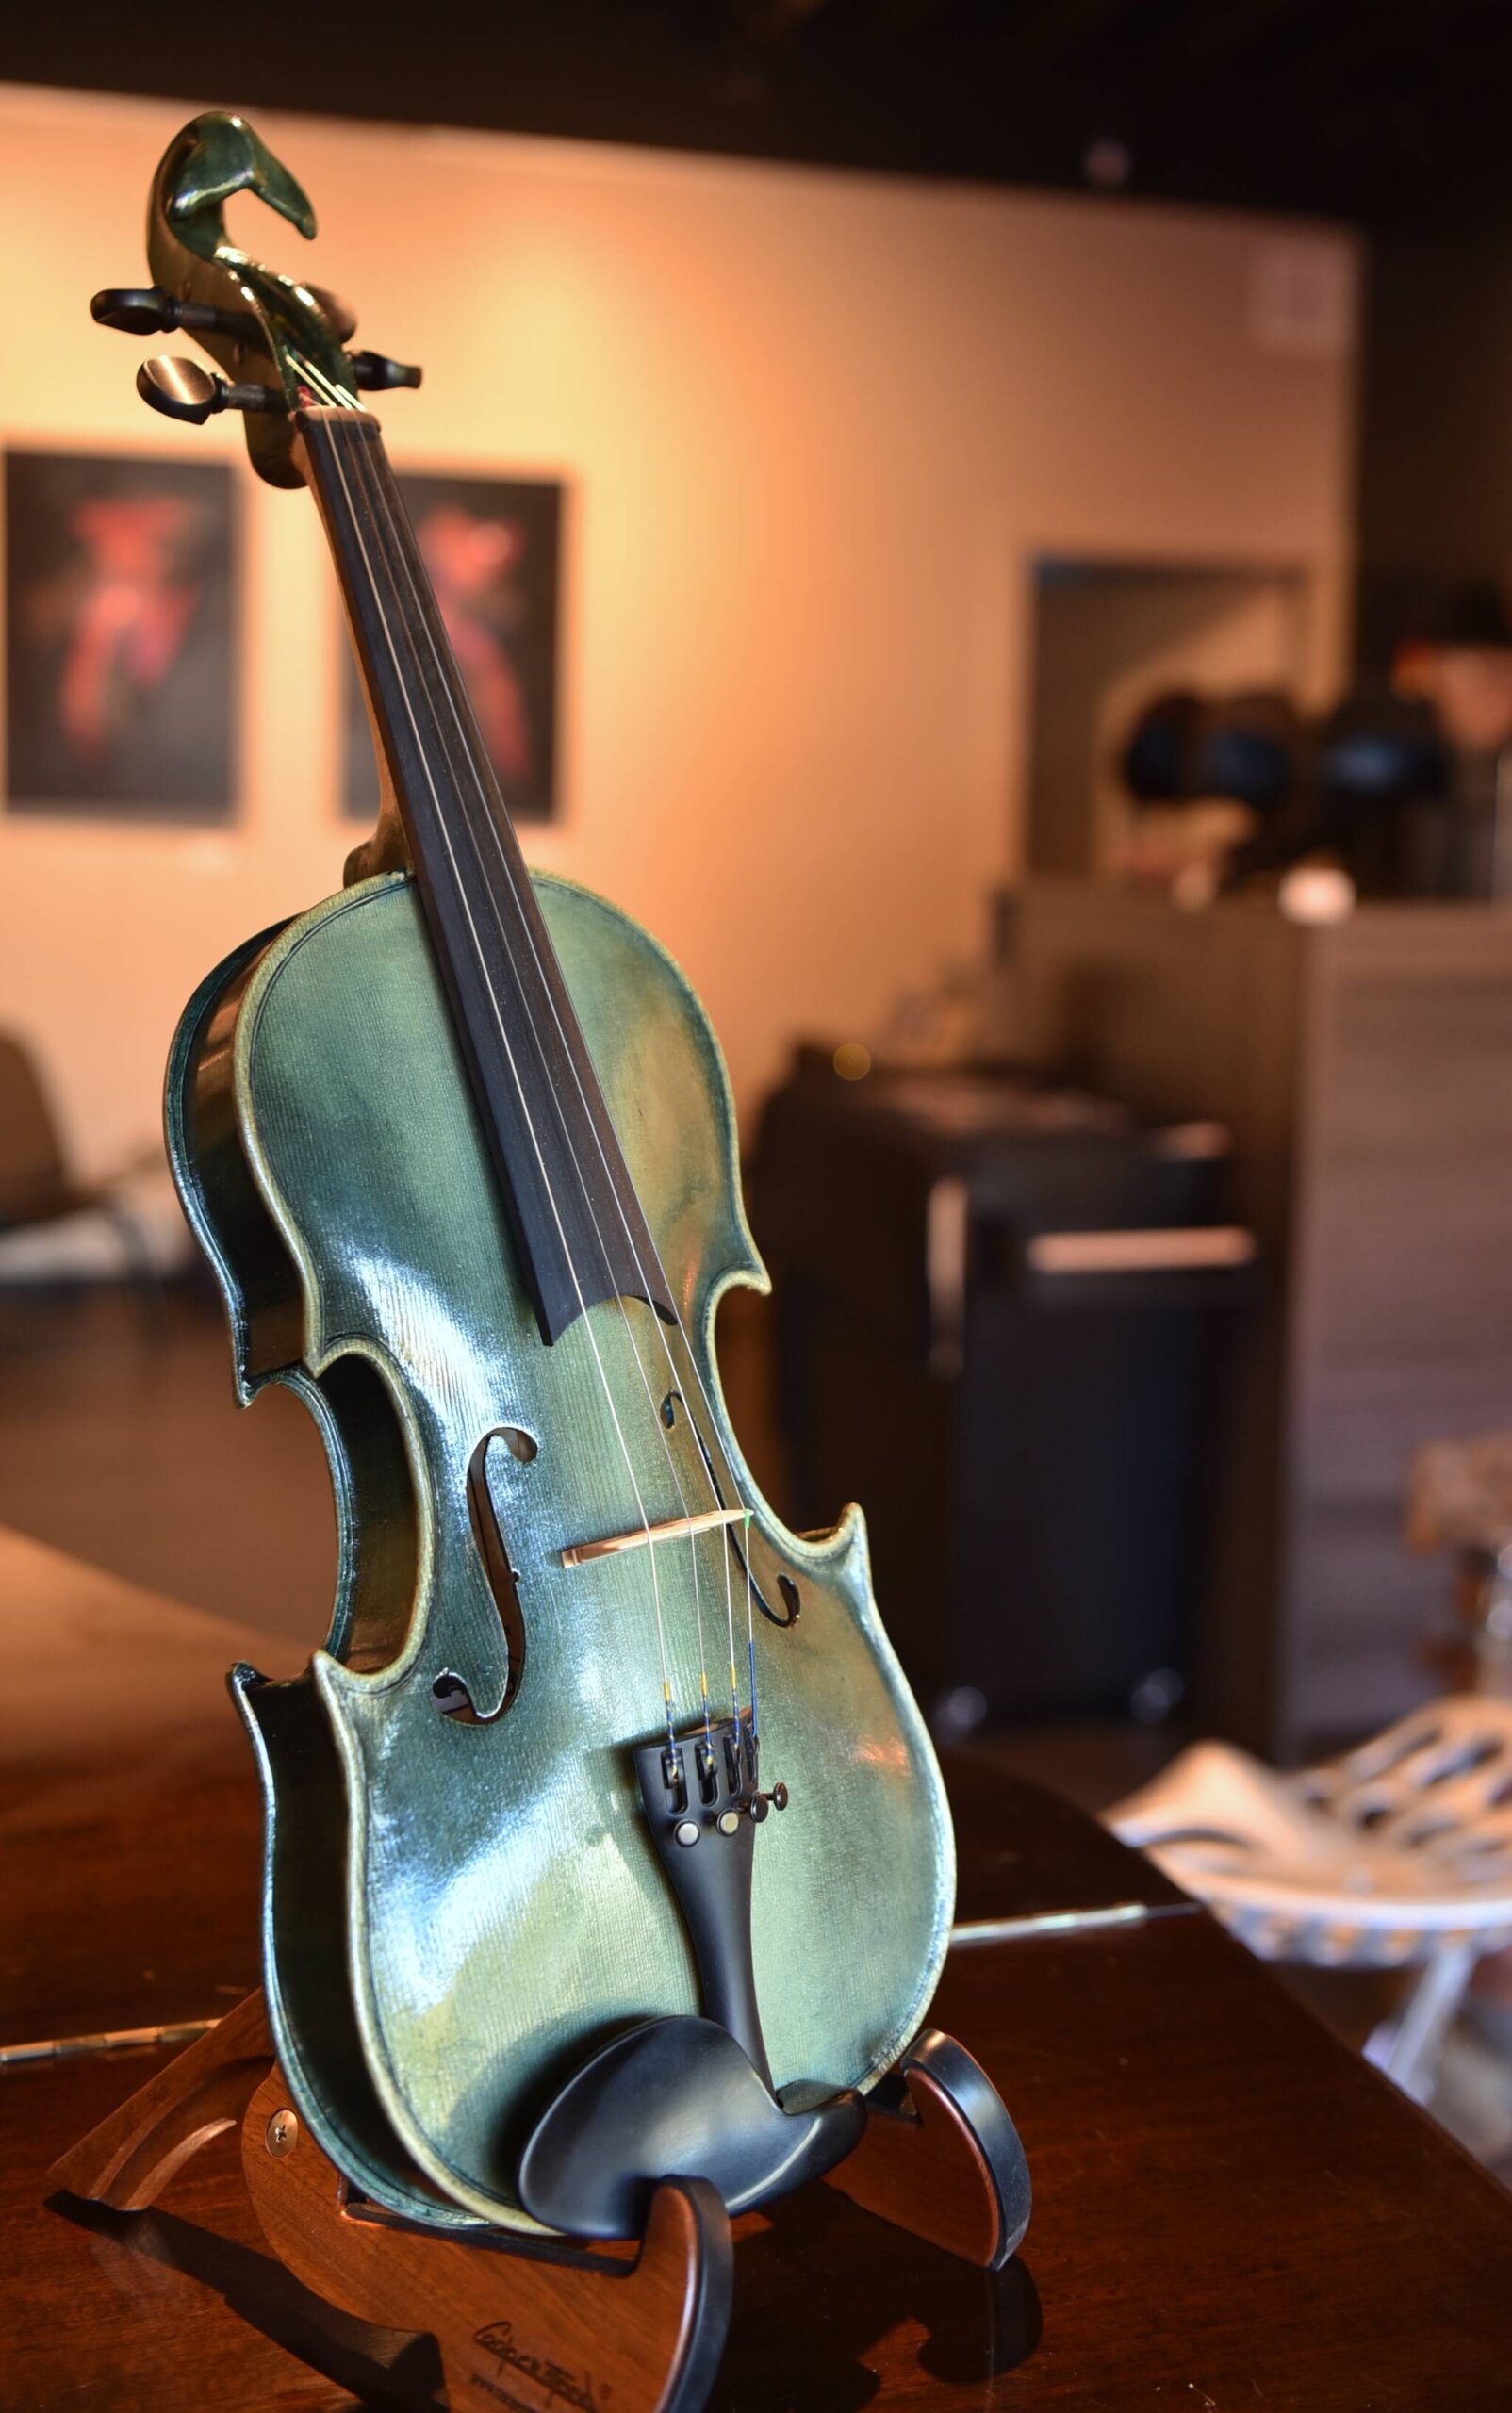 A green violin with Orca features on display in the studio is one of several items made by local artists.